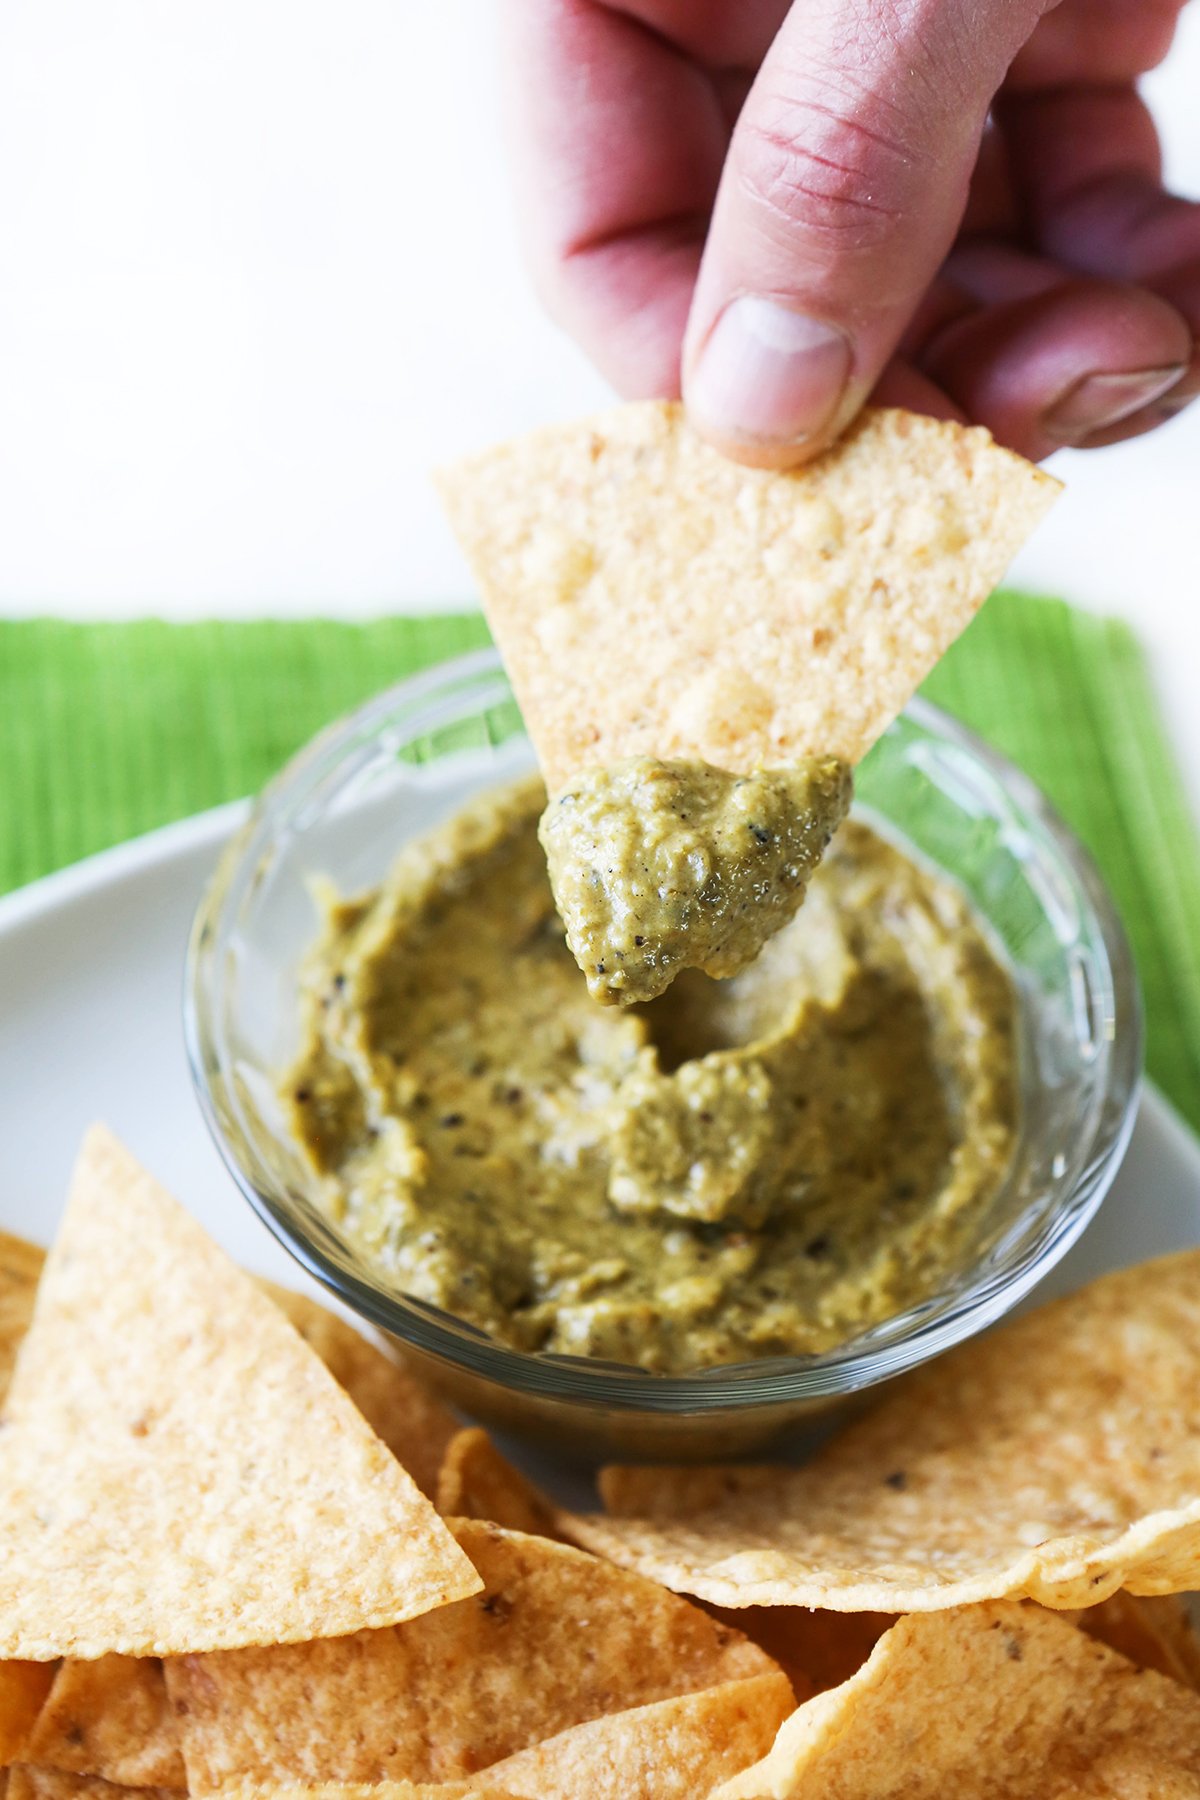 Fingers holding tortilla chip that has been dipped in green sauce.